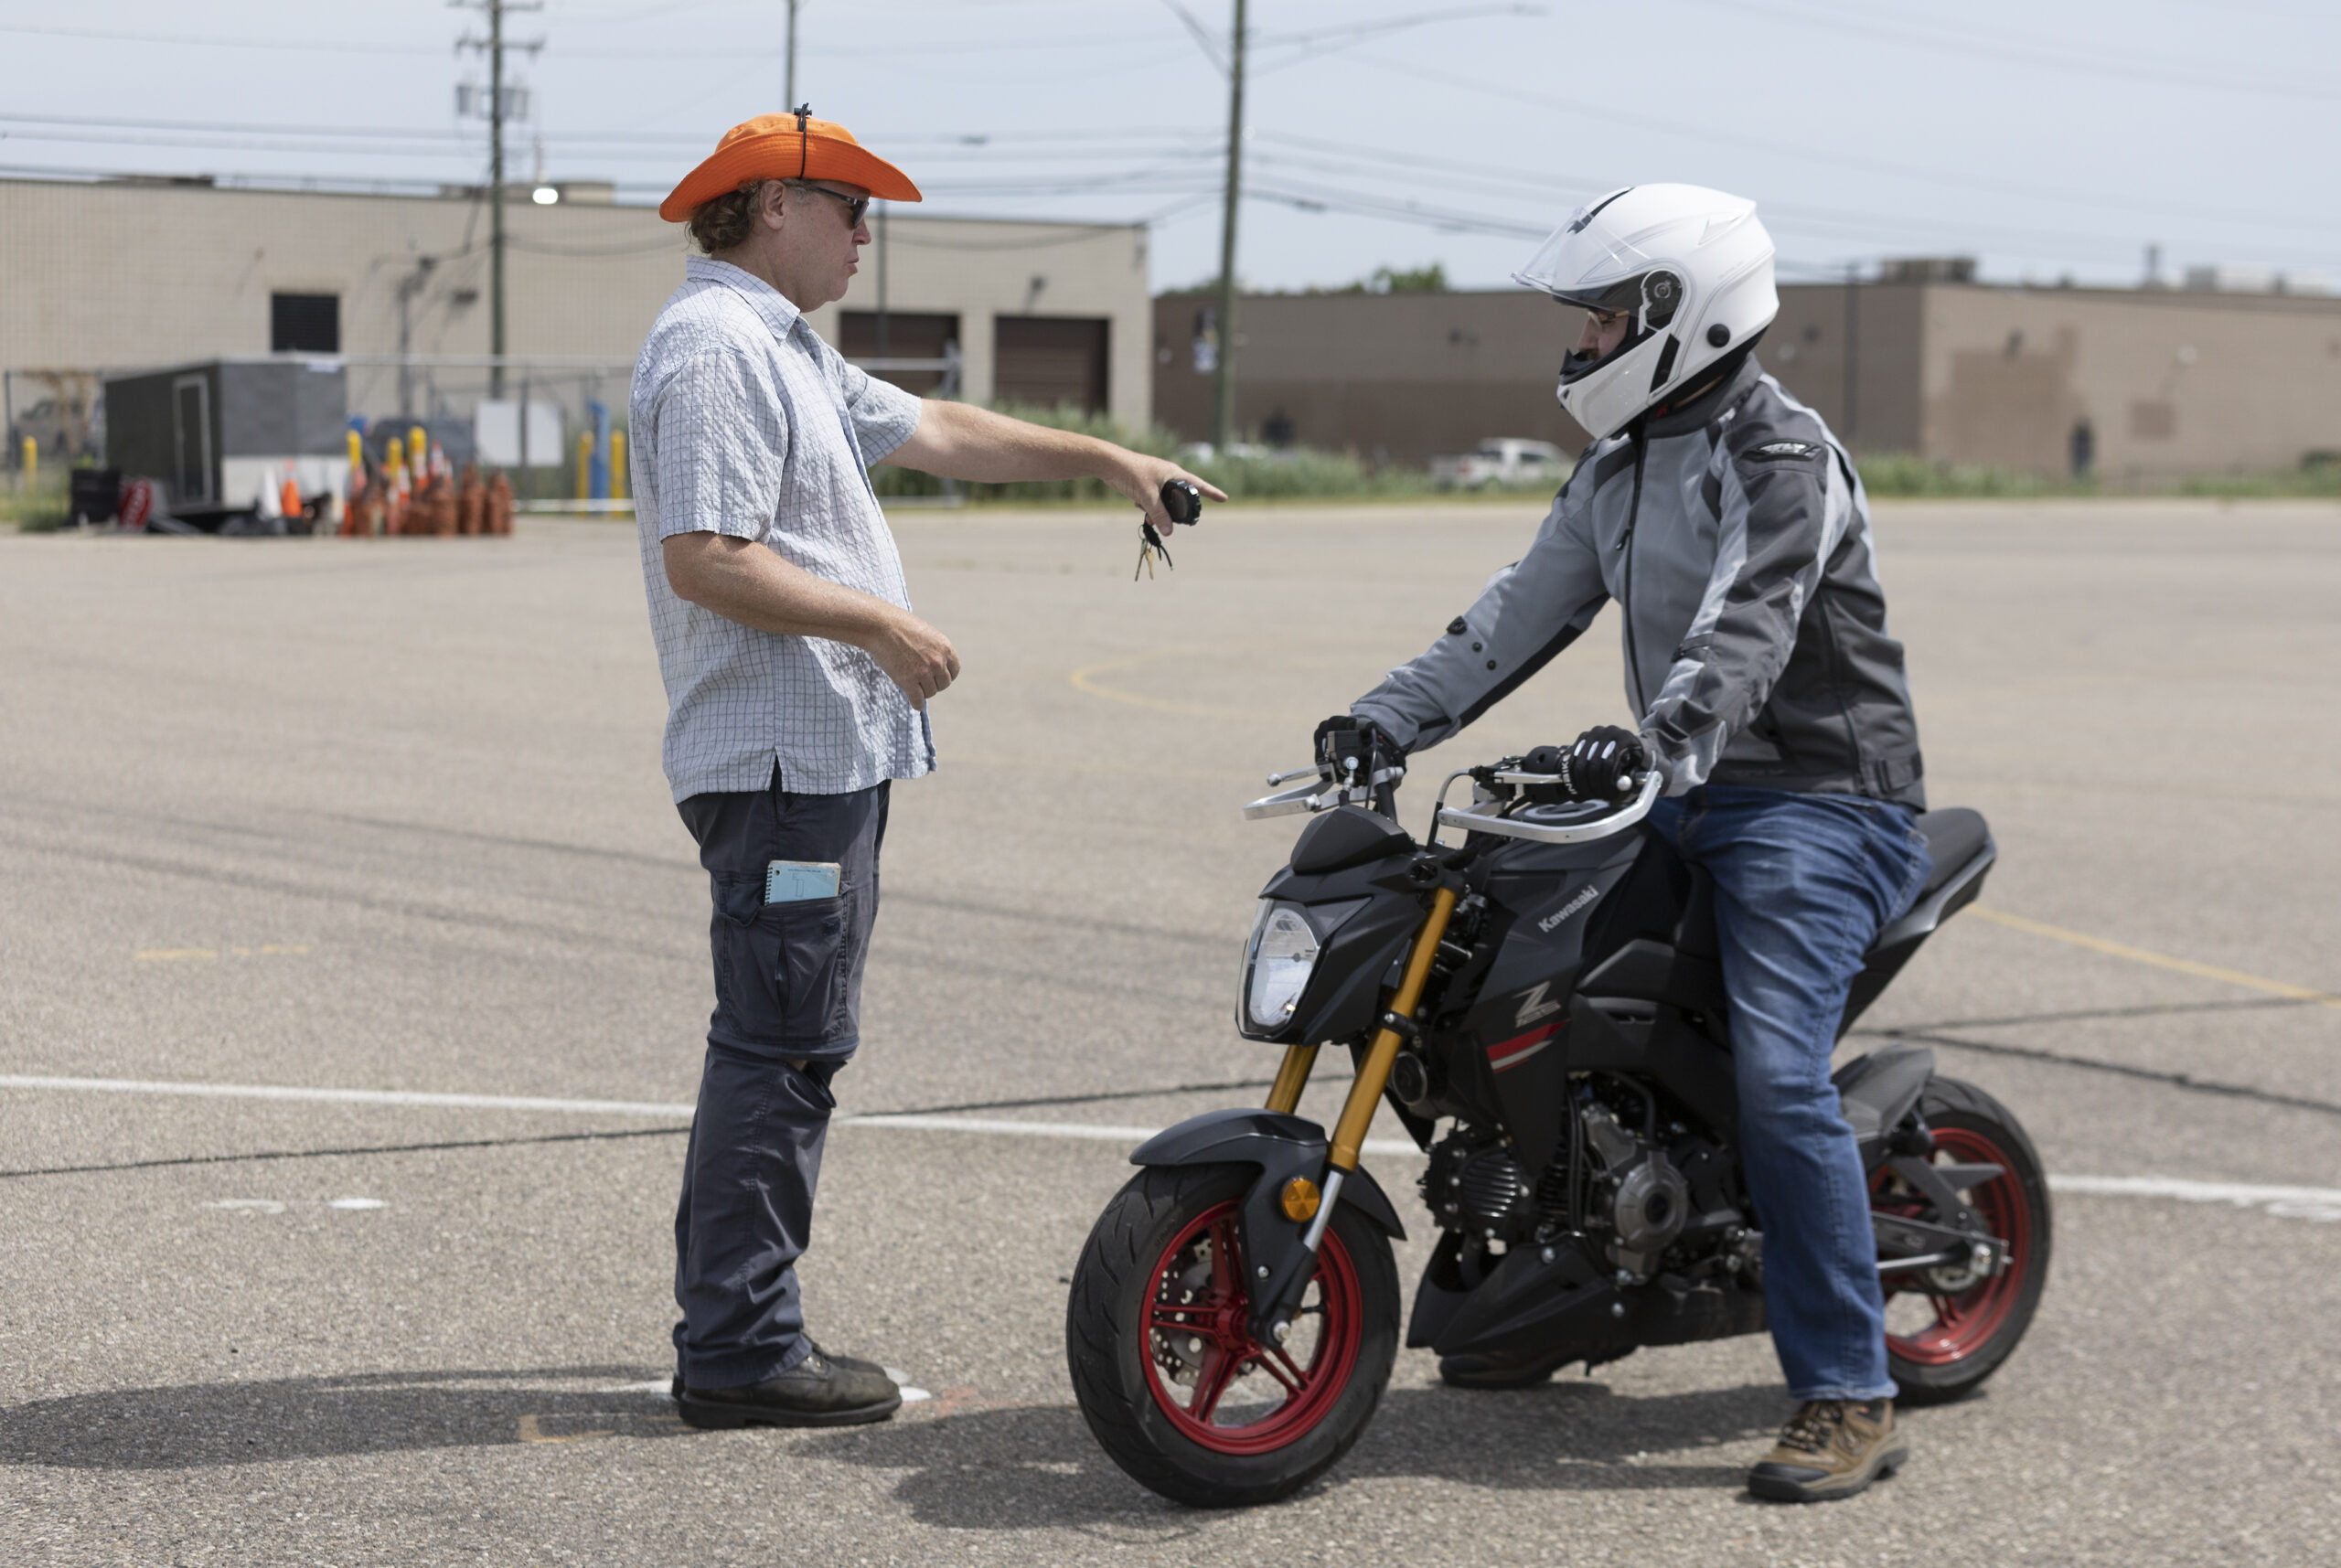 two motorcyclists talking